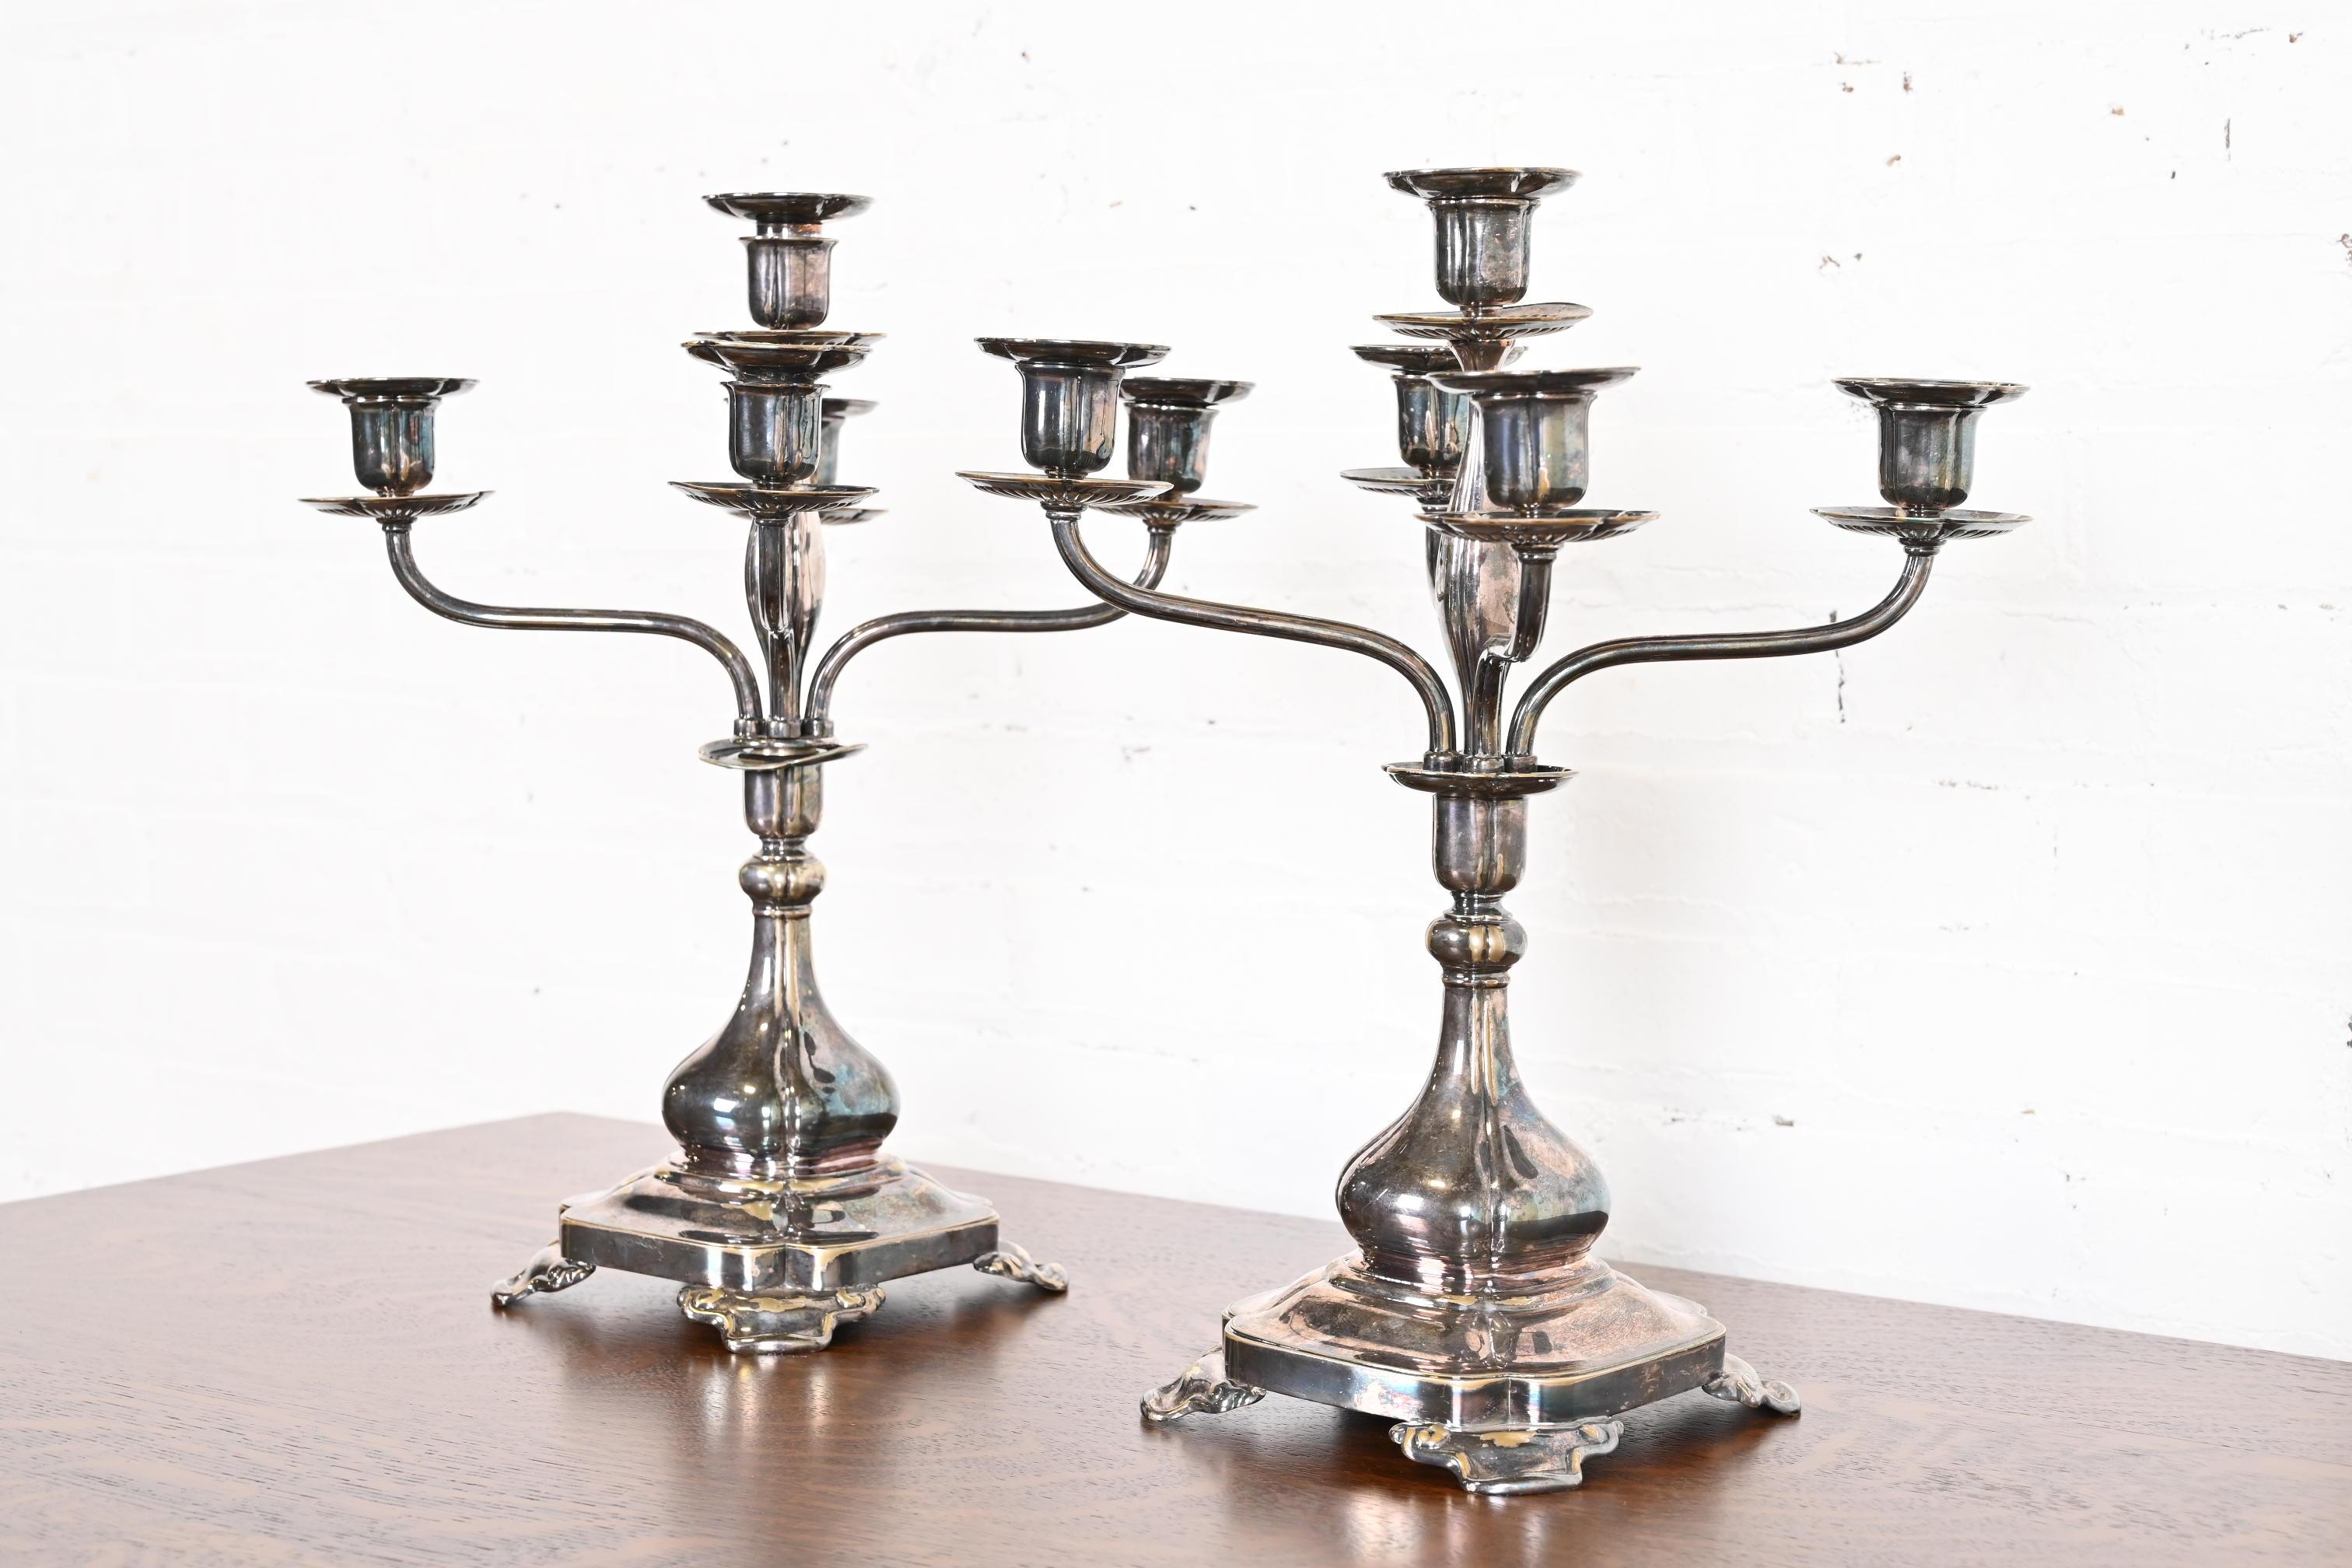 Tiffany & Co. Antique Silver Five-Arm Candelabra, Pair In Good Condition For Sale In South Bend, IN